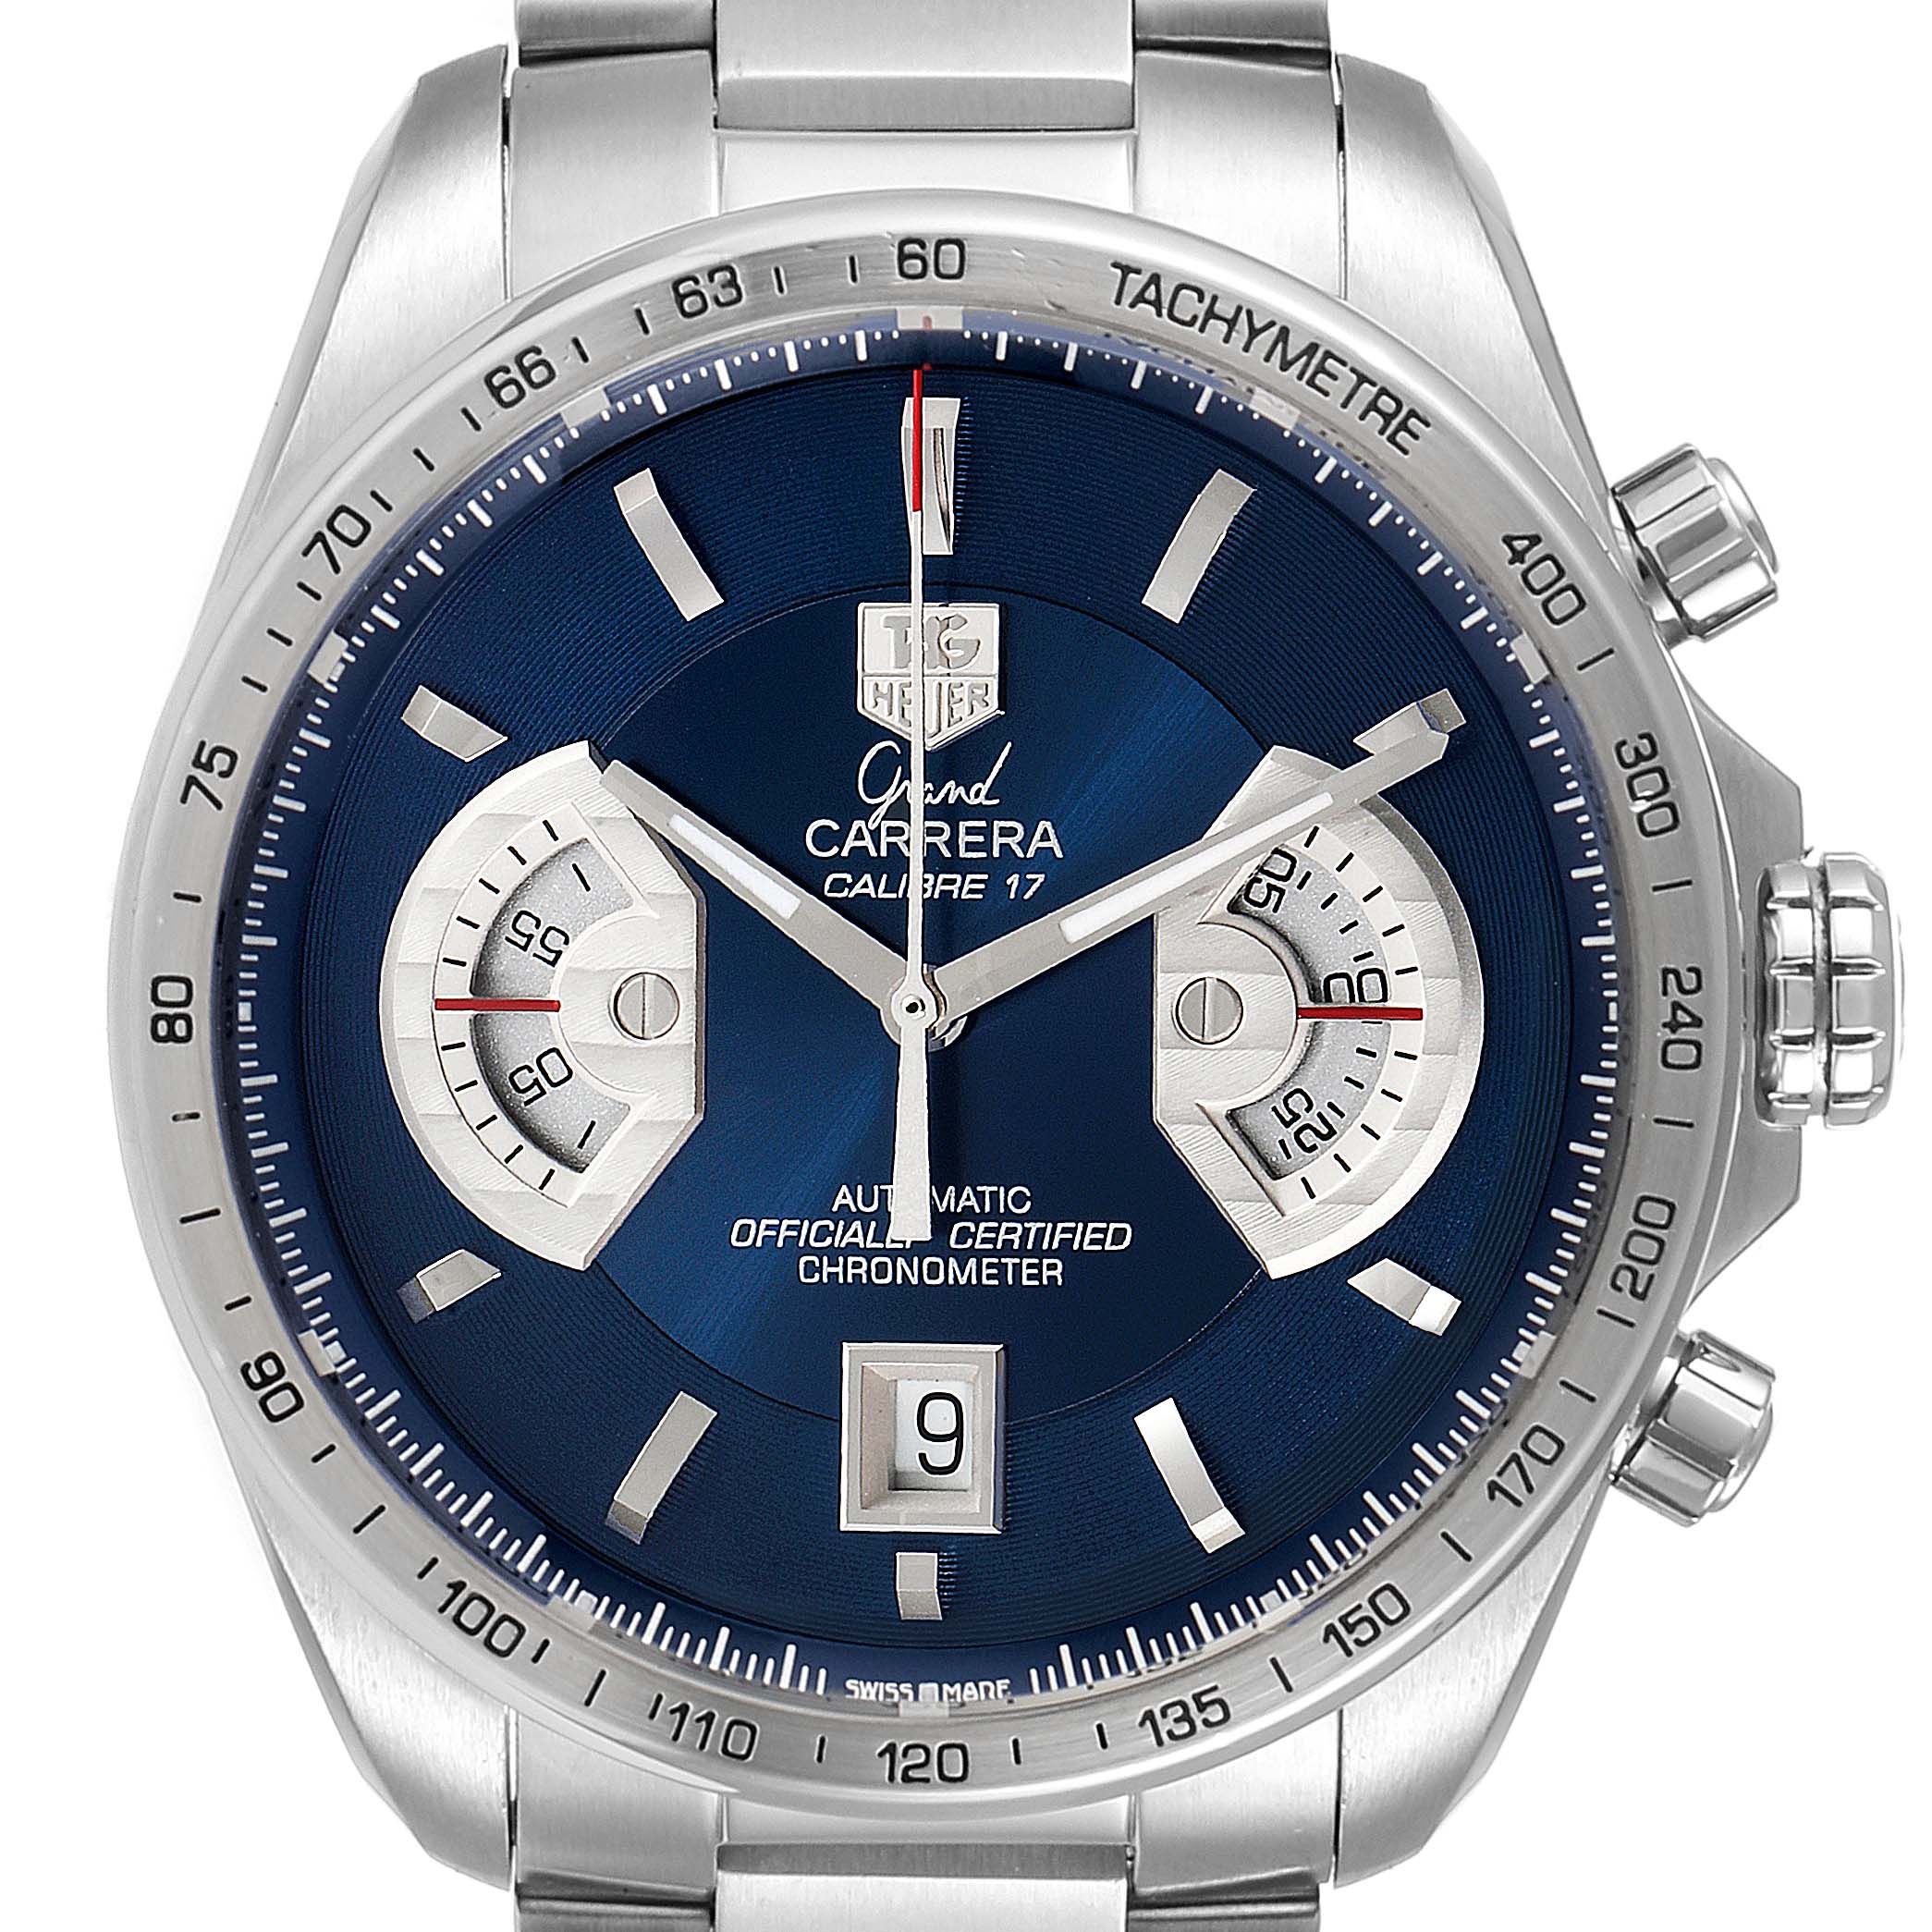 Tag Heuer Men's Grand Carrera Stainless Steel Watch